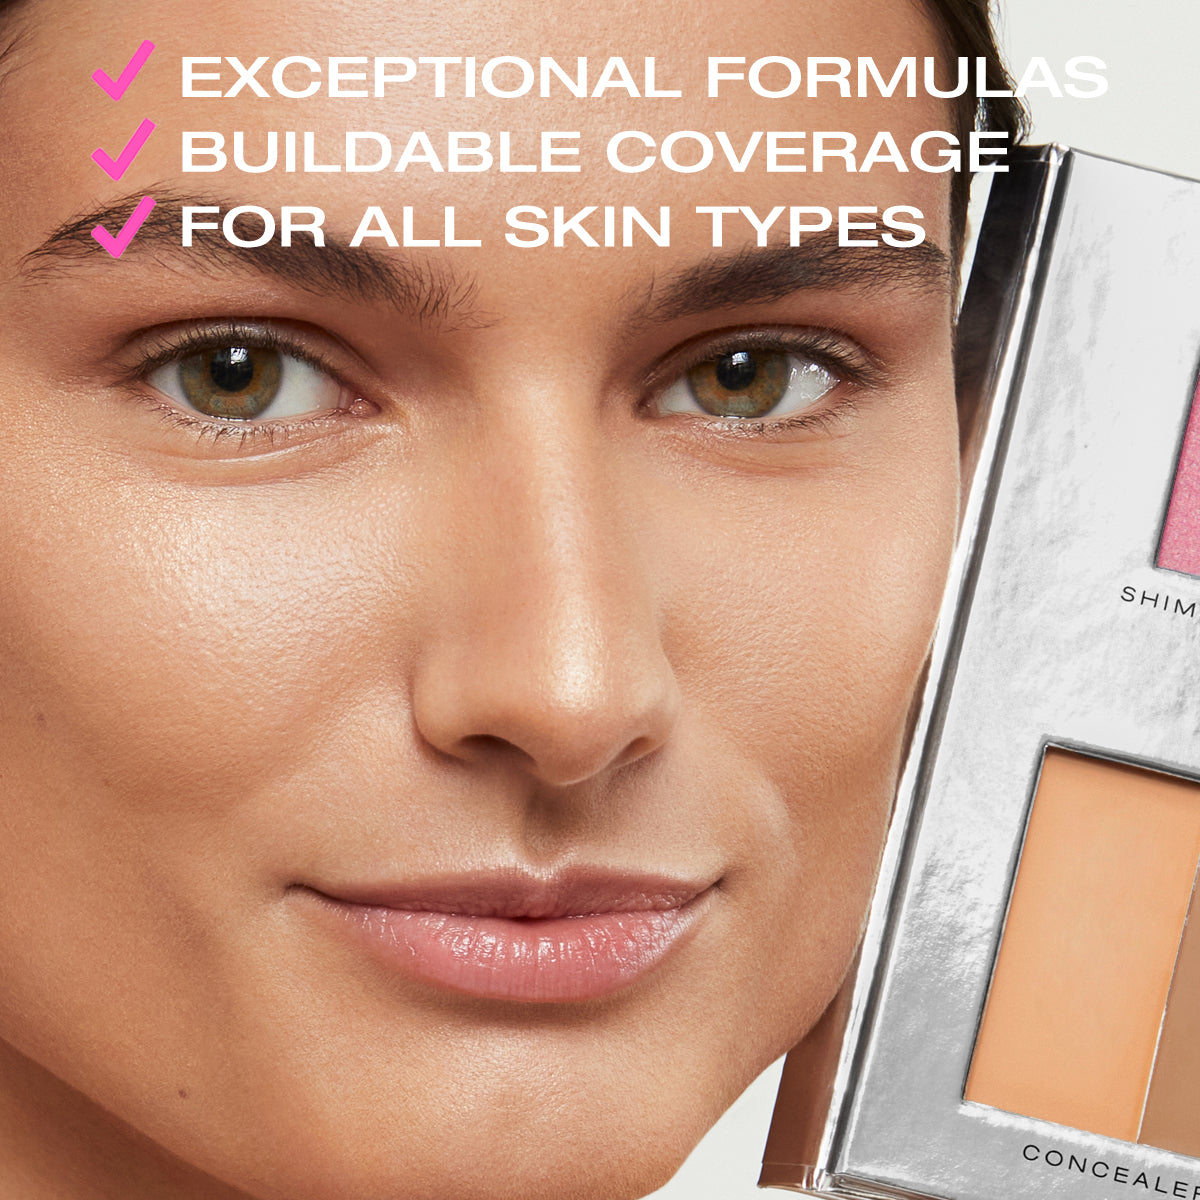 a photo of a beautiful woman with copy on top stating that the coverage in Fold Out Complexion is buildable, and the formulas are clean & good for all skin types